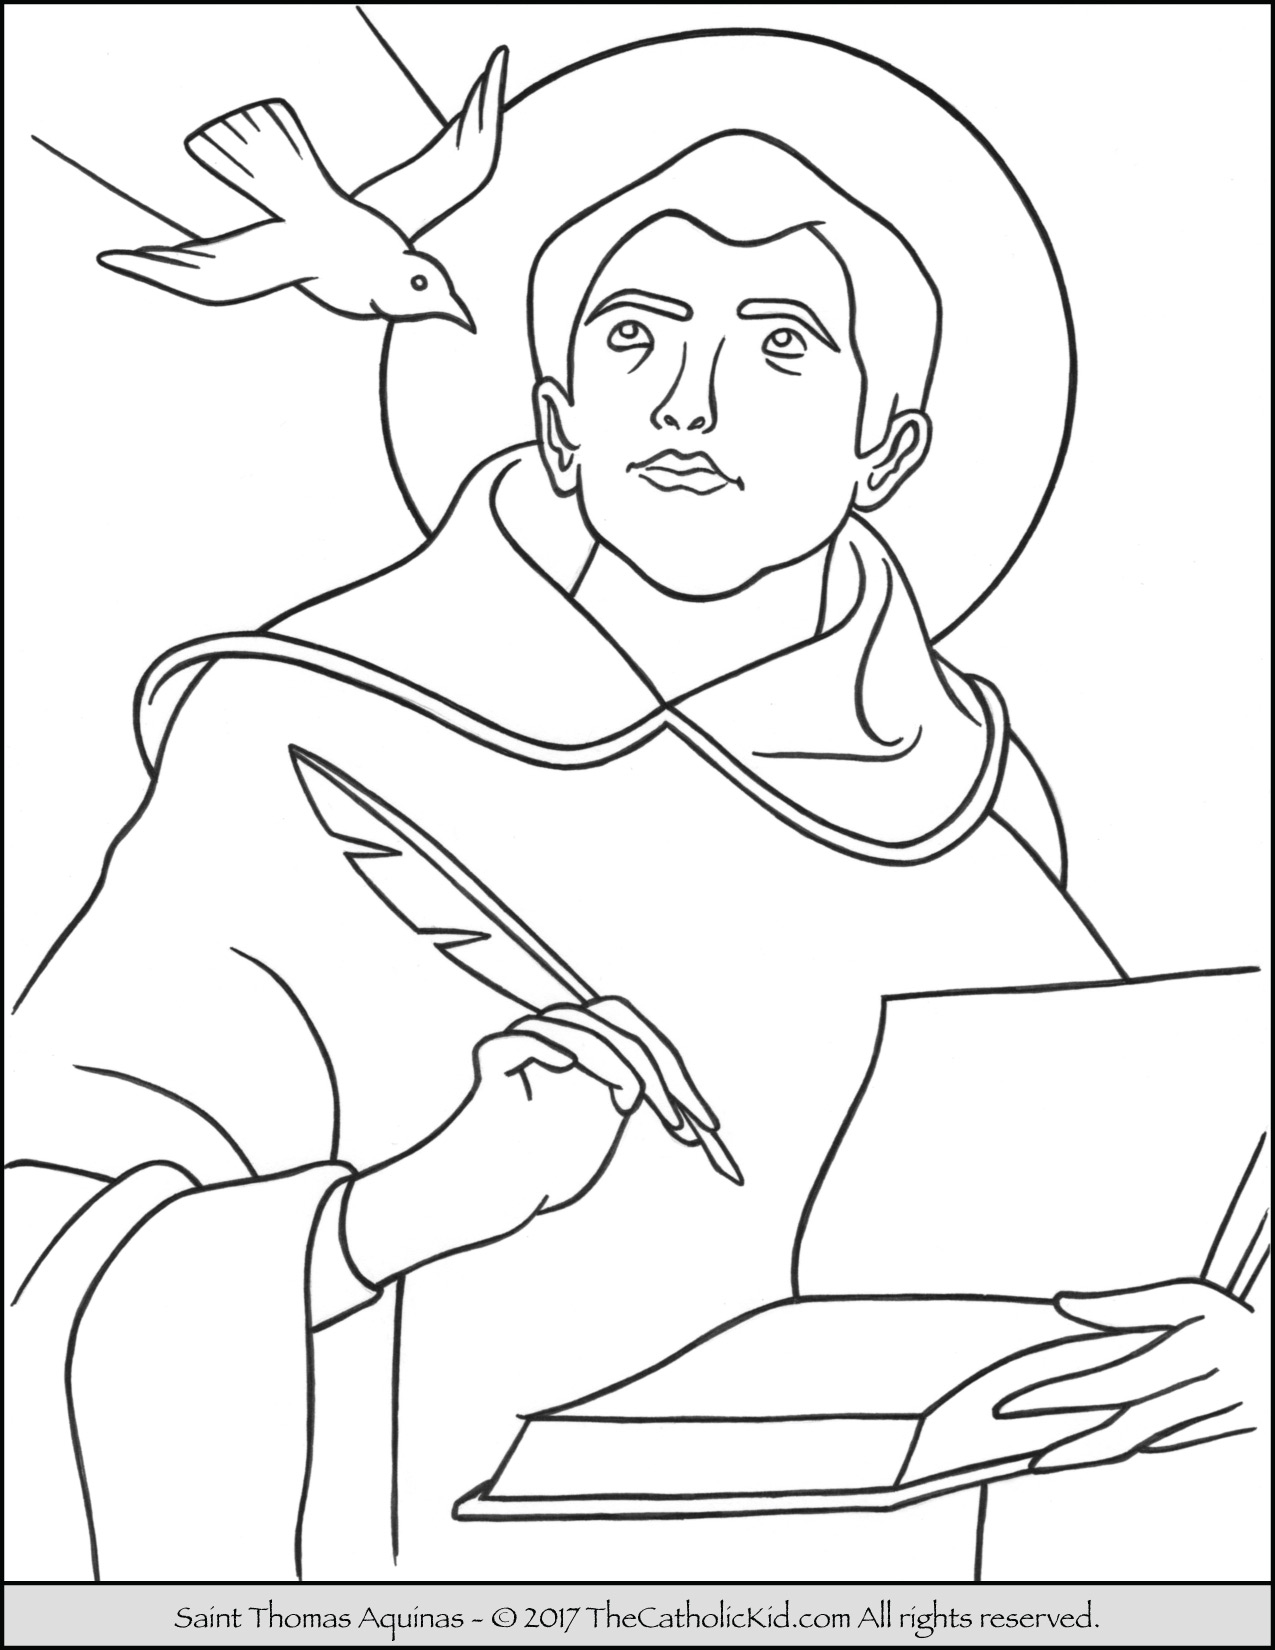 Catholic Saints Coloring Pages at Free printable